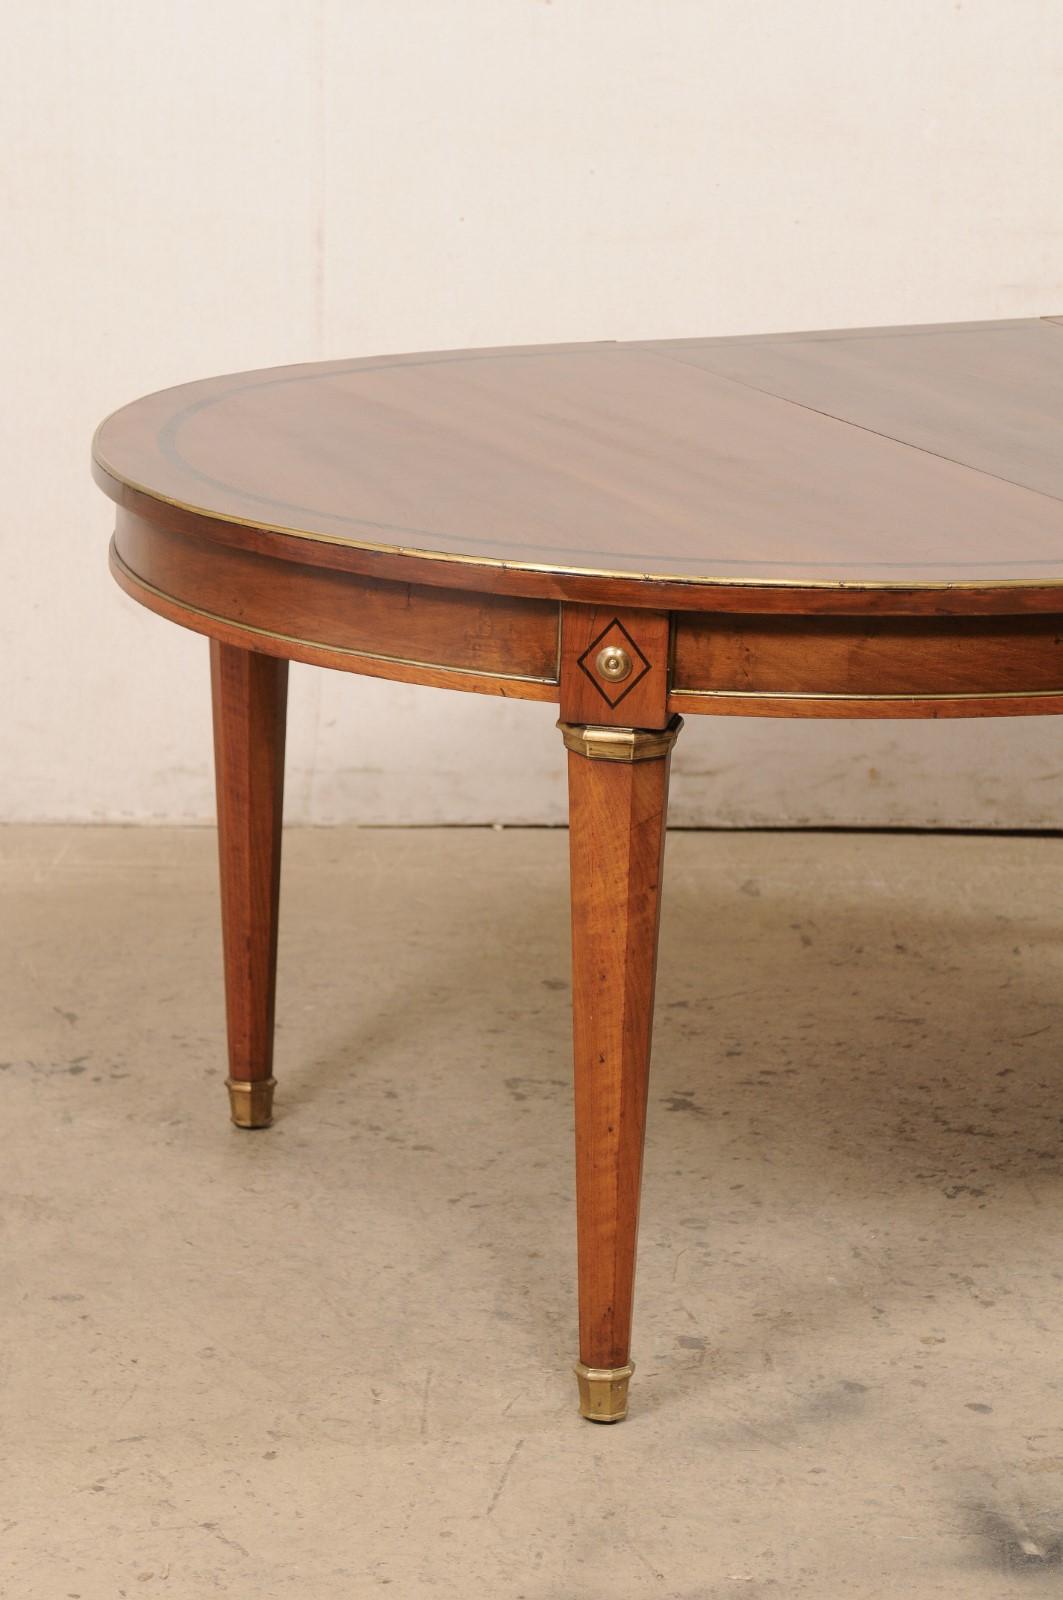 Neoclassical French Neoclassic Style Oval Table with Brass Trim & Accents '1 Leaf Extension' For Sale